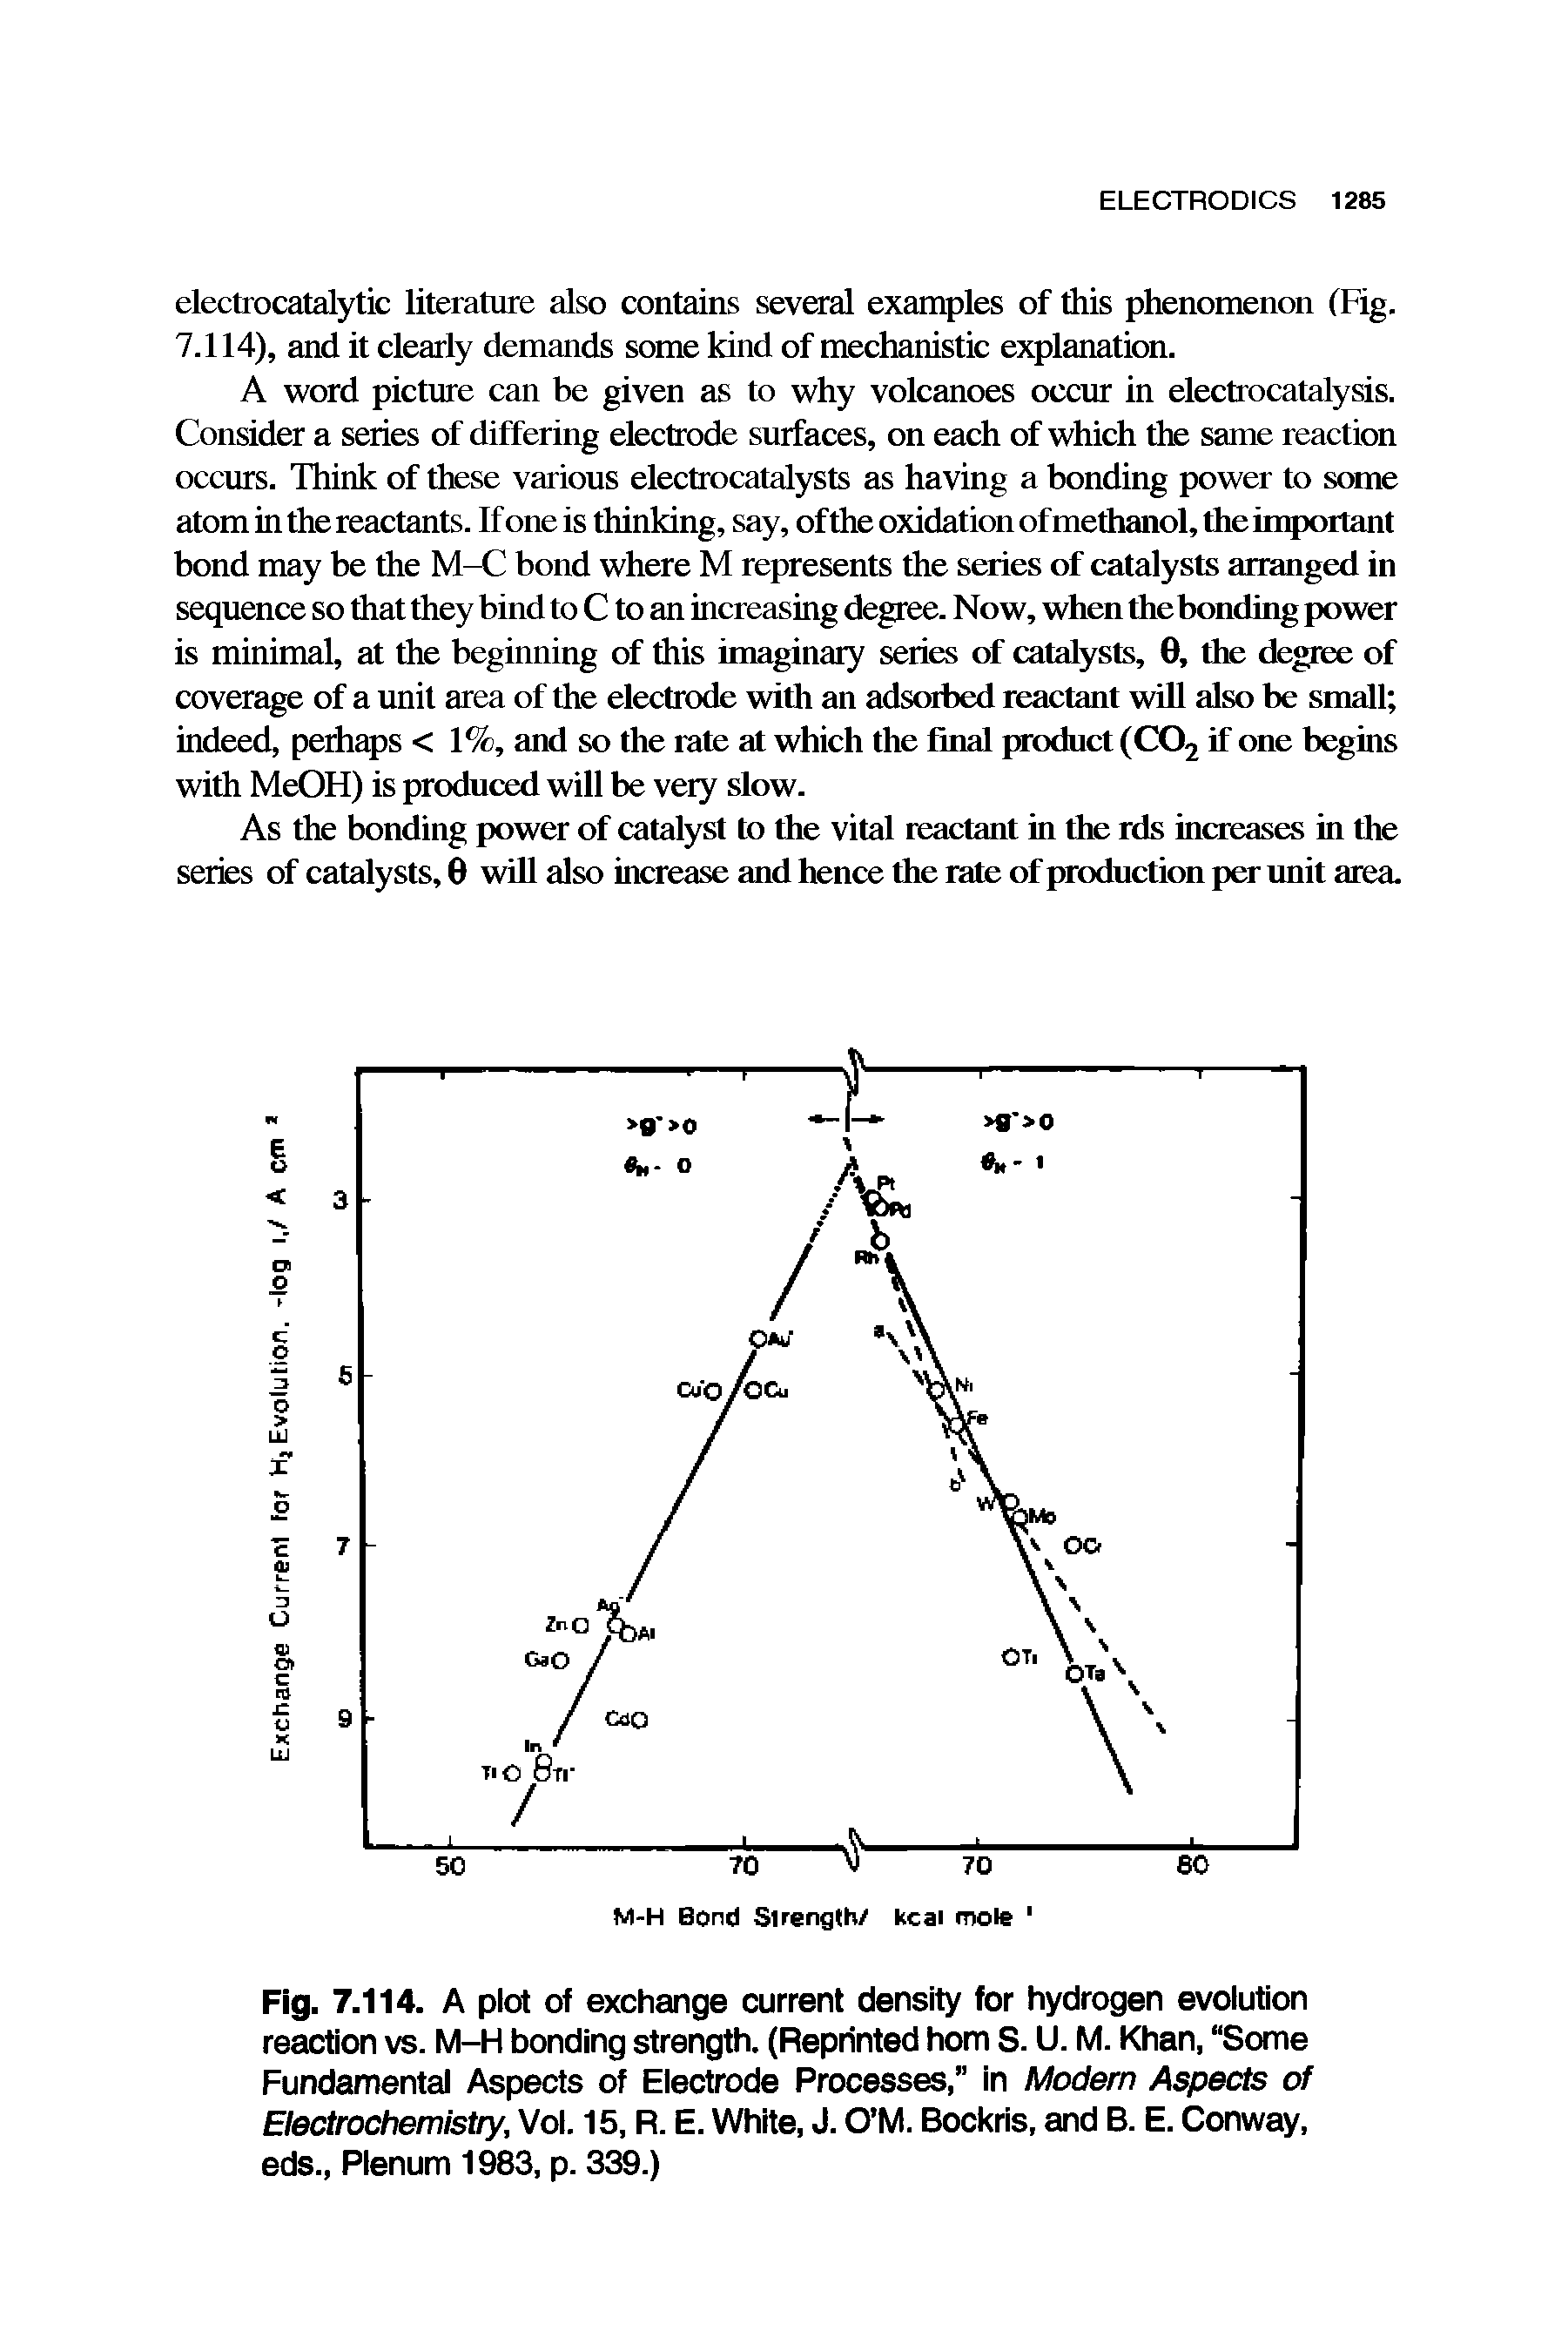 Fig. 7.114. A plot of exchange current density for hydrogen evolution reaction vs. M-H bonding strength. (Reprinted hom S. U. M. Khan, Some Fundamental Aspects of Electrode Processes," in Modern Aspects of Electrochemistry, Vol. 15, R. E. White, J. O M. Bockris, and B. E. Conway, eds., Plenum 1983, p. 339.)...